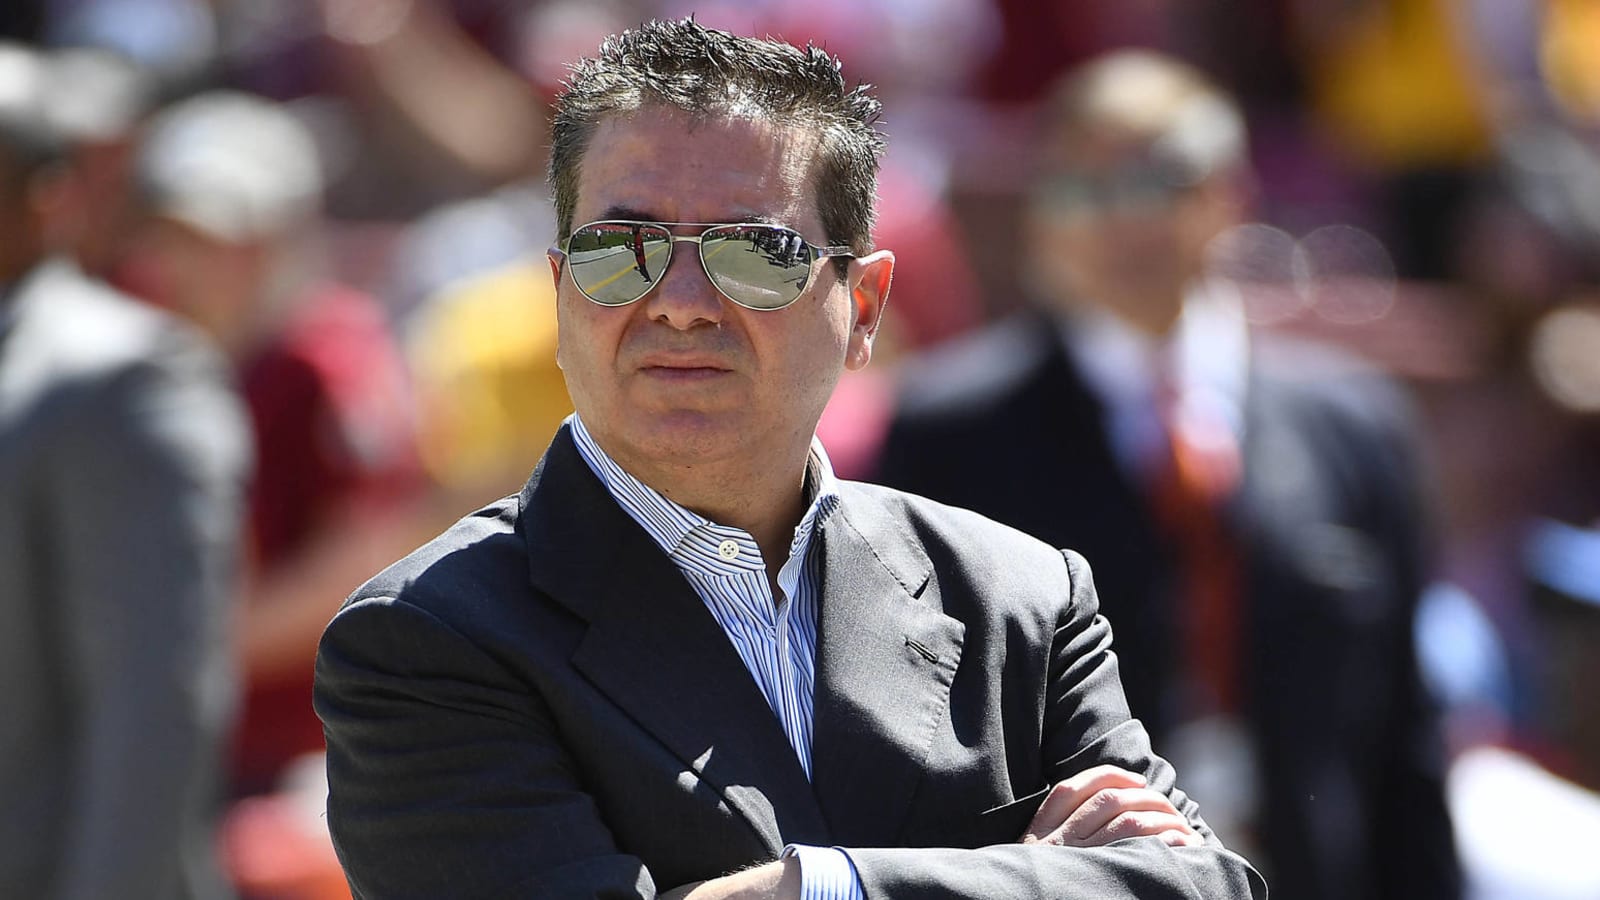 WFT owner Dan Snyder tried to interfere with investigation?